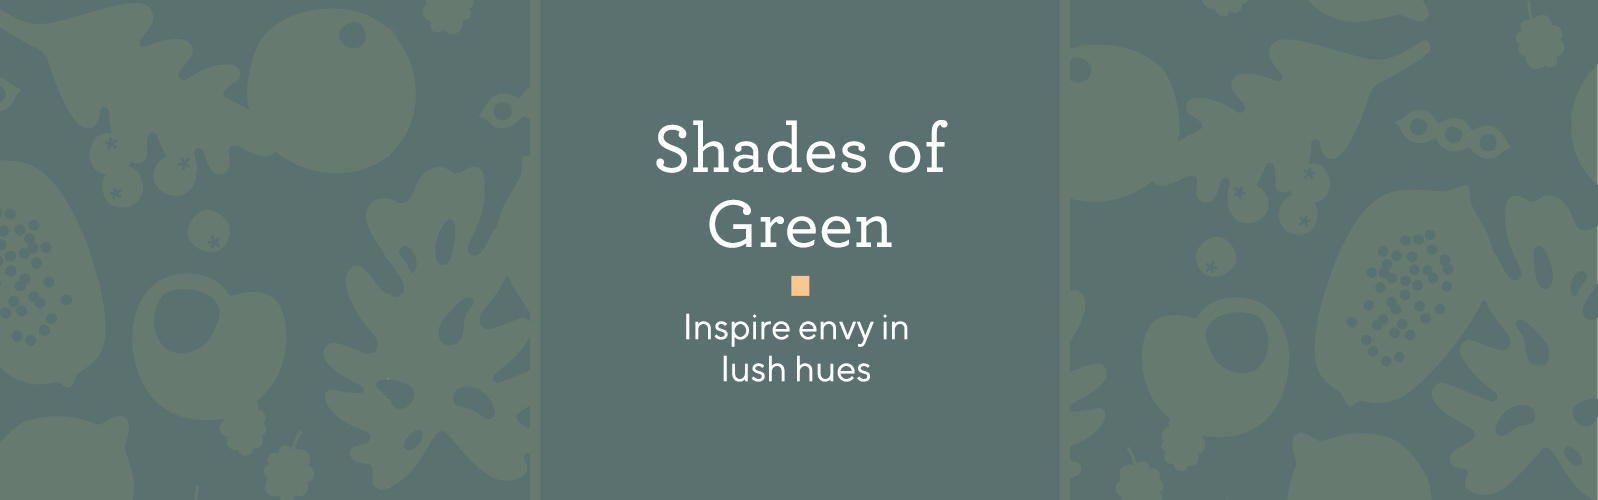 Shades of Green  Inspire envy in lush hues